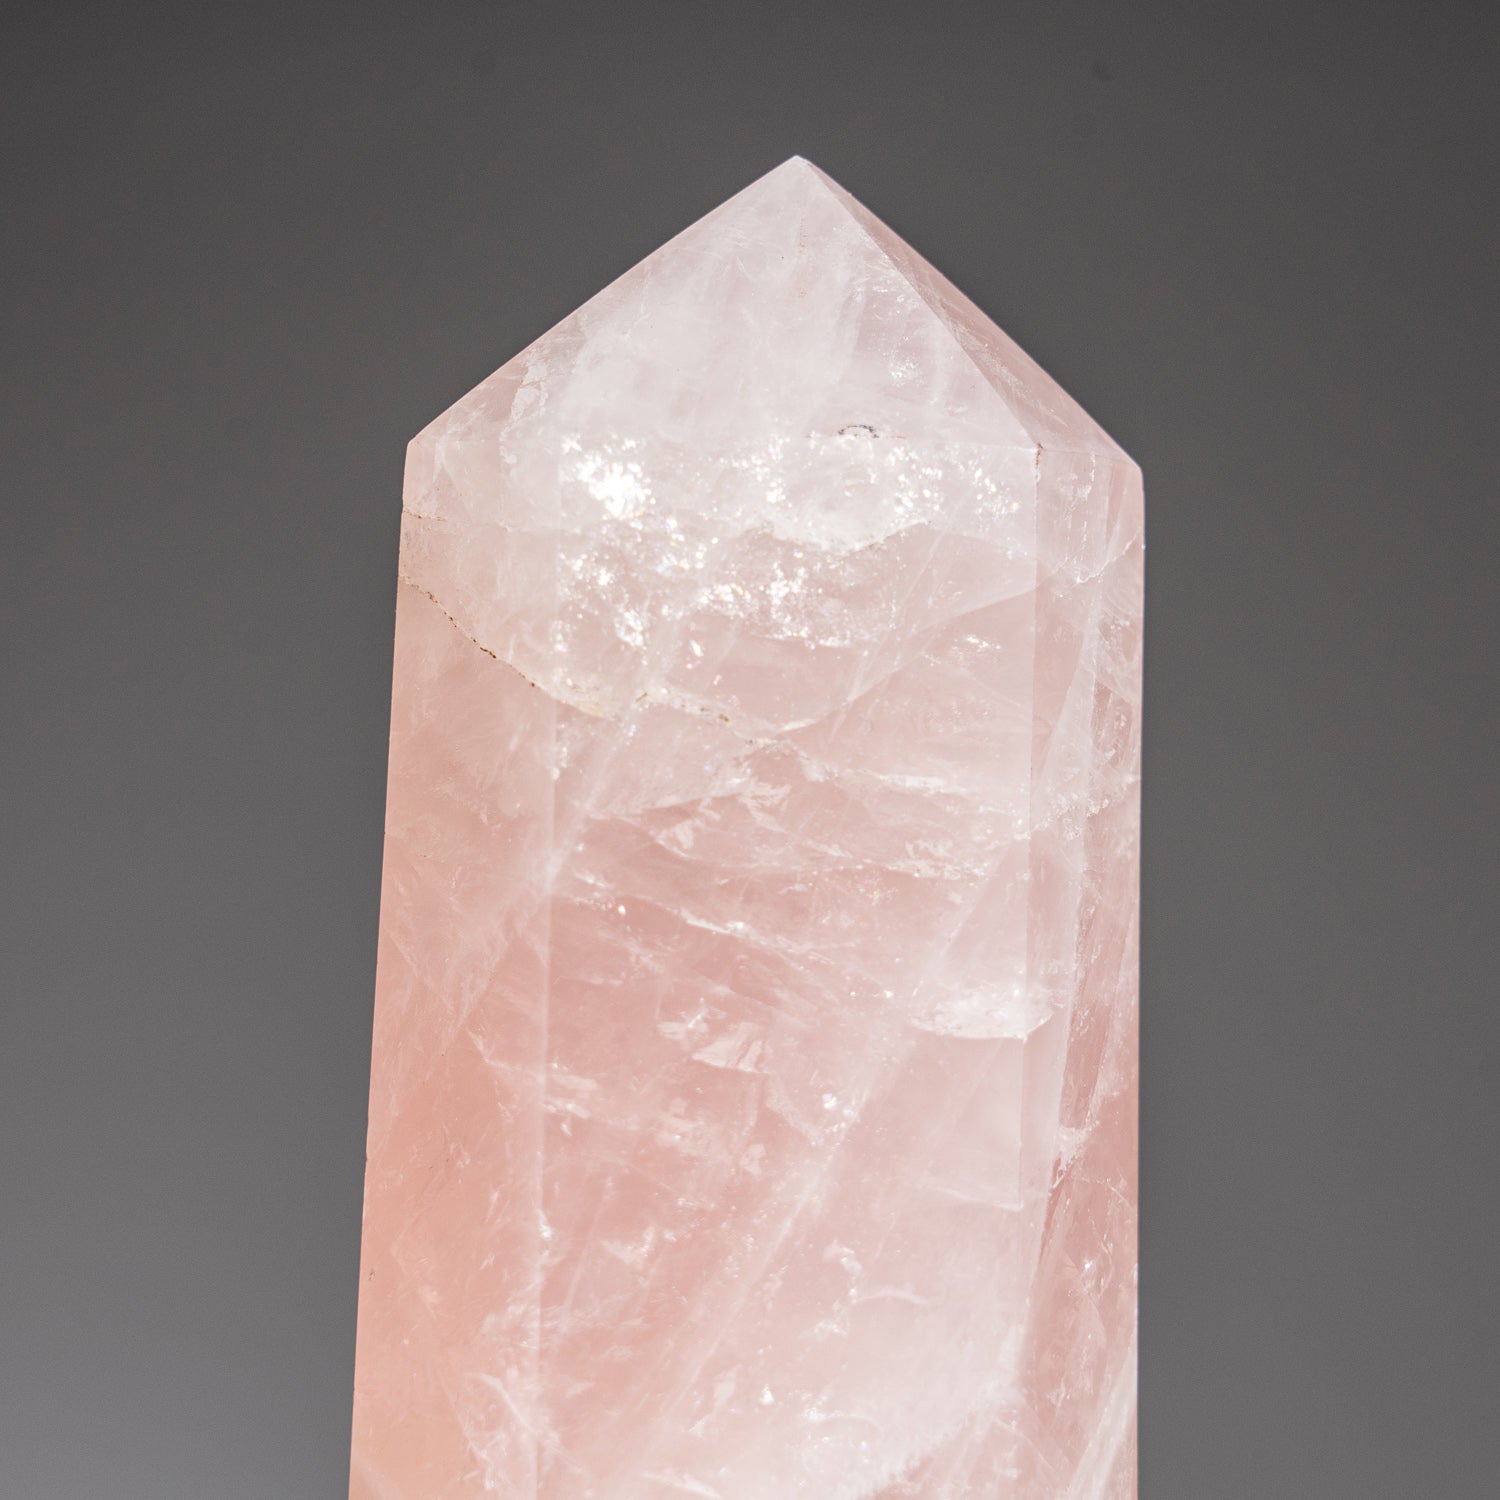 Genuine Rose Quartz Polished Point from Brazil (1.7 lbs)